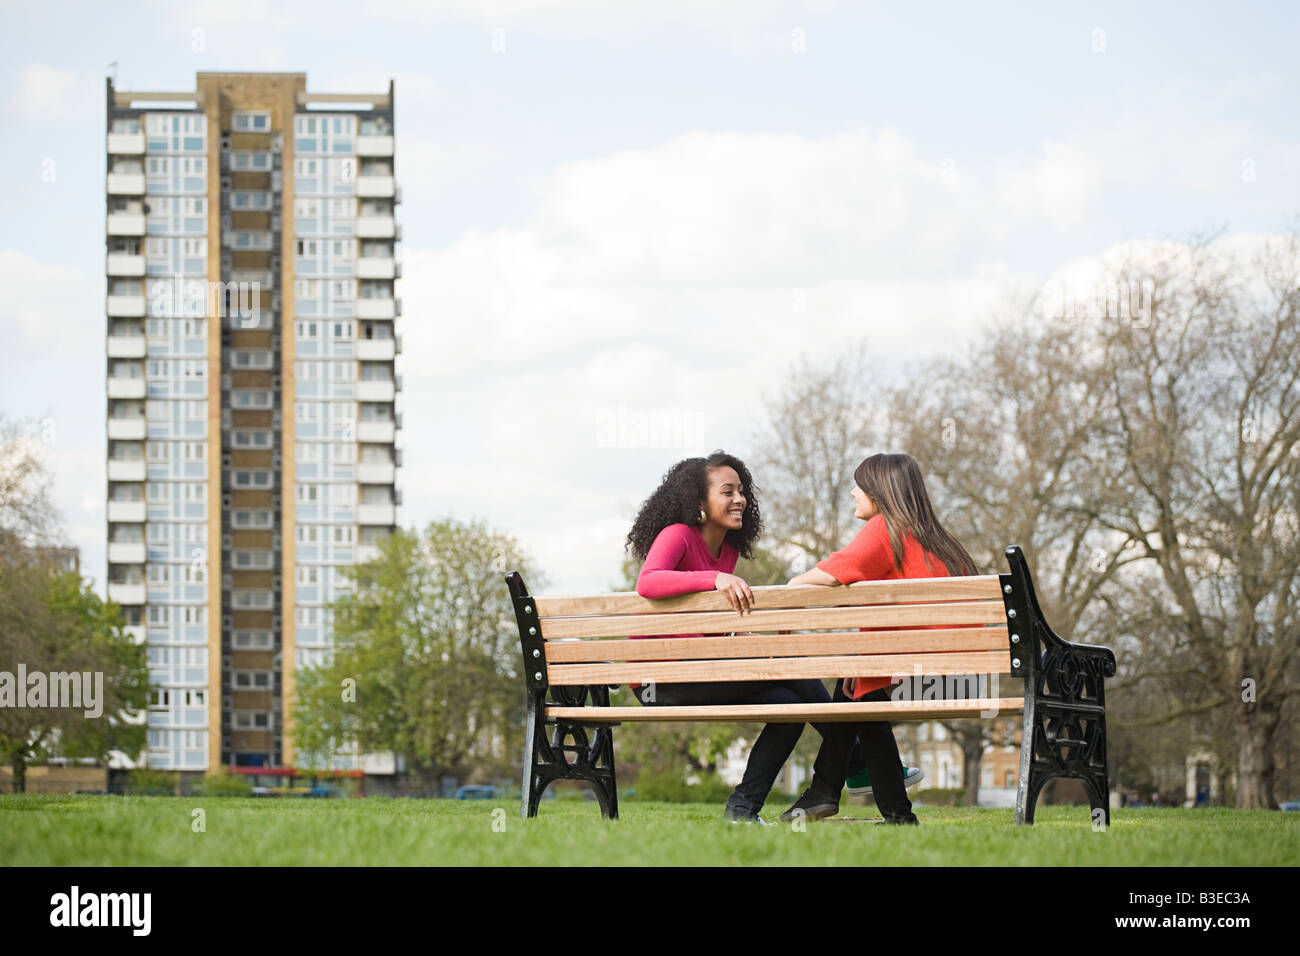 Two teenage girls on a bench Stock Photo